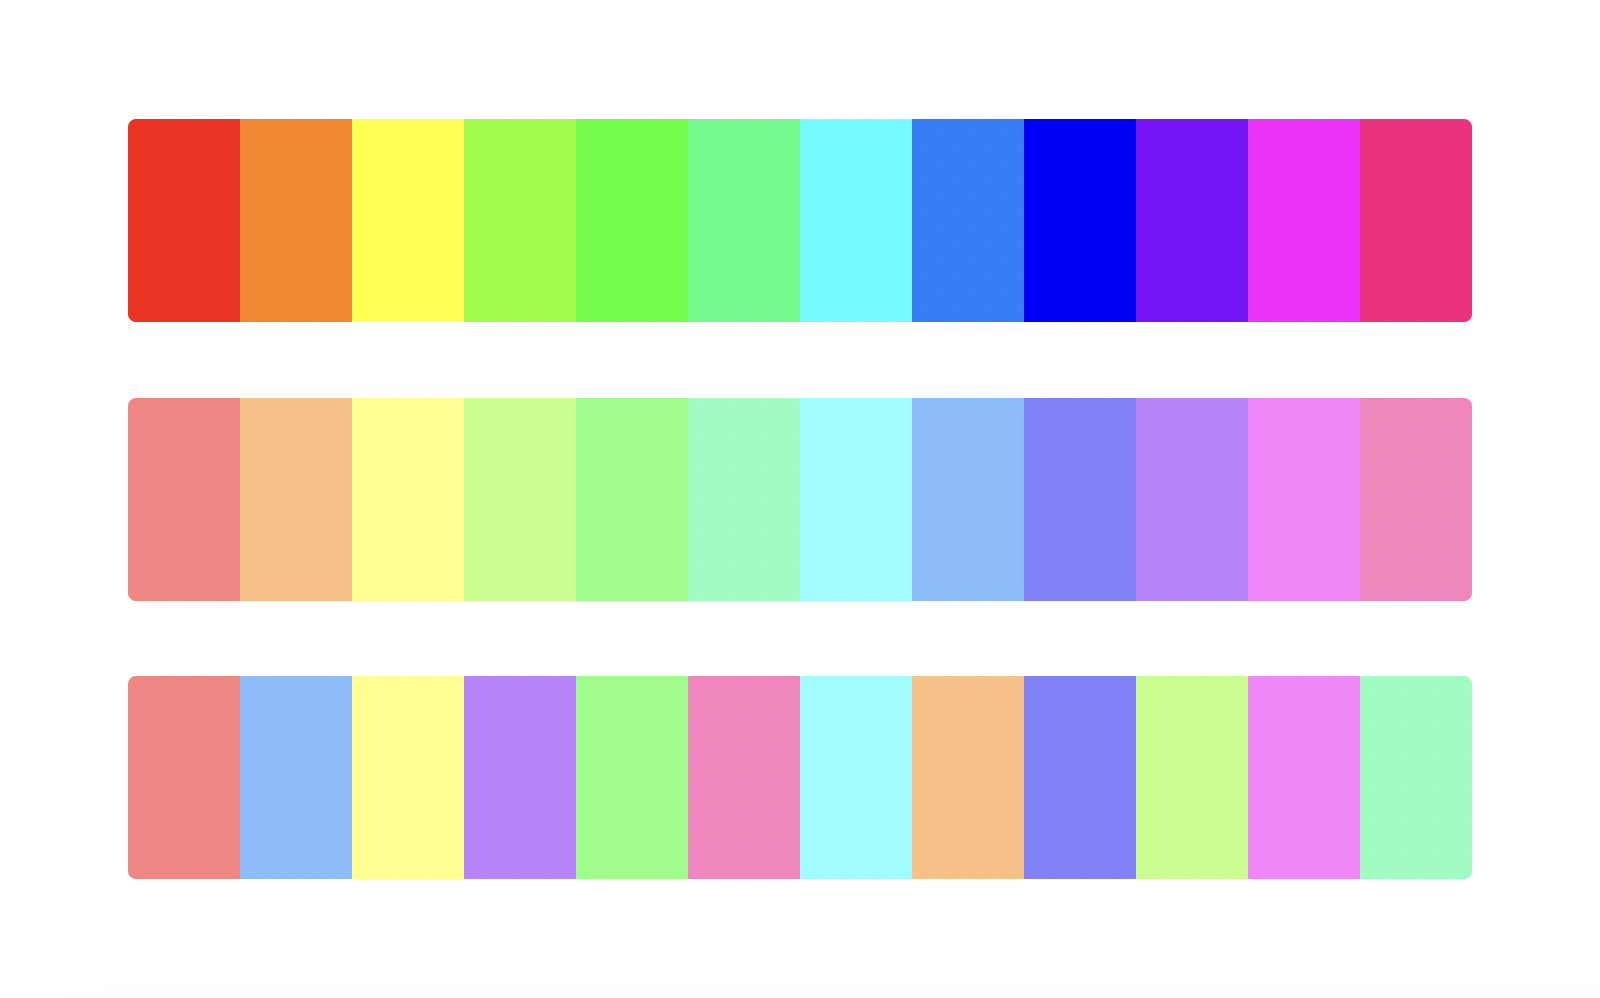 Designing an accessible color system for ChartSimply